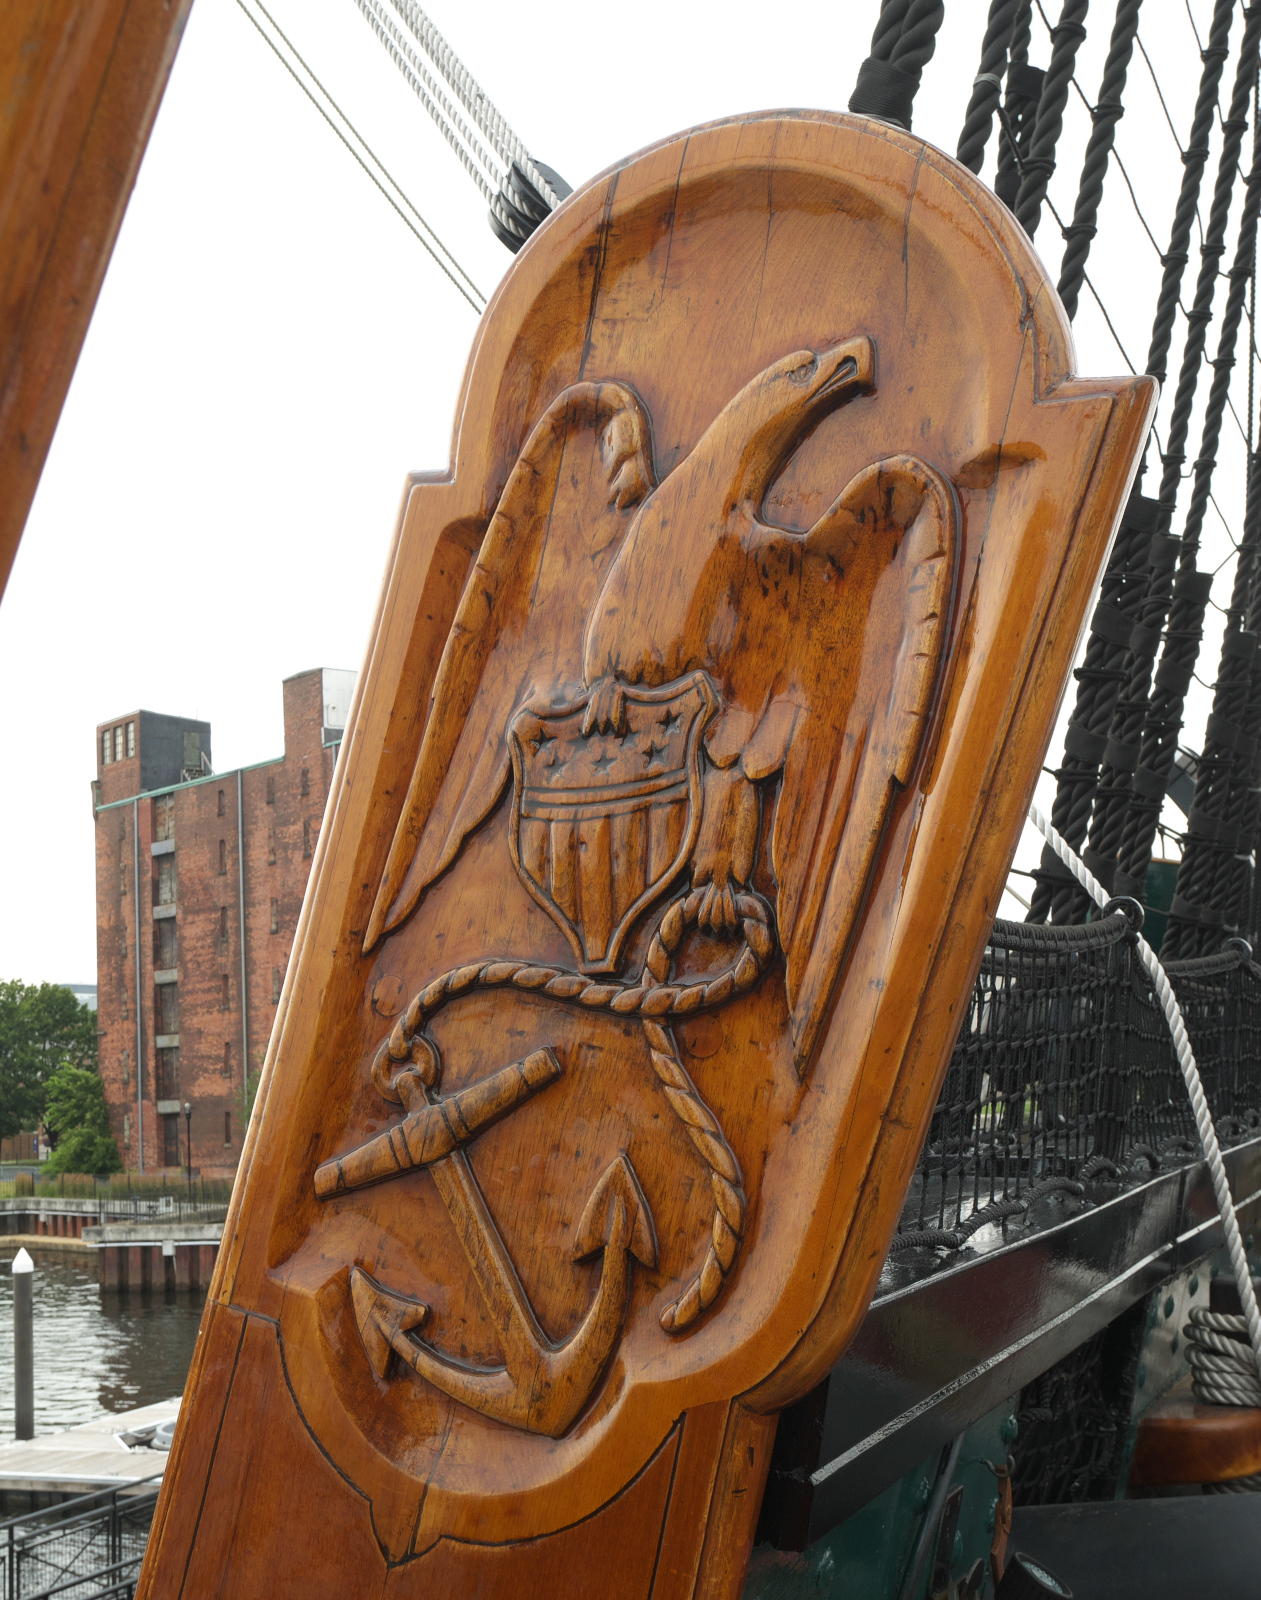 An eagle insignia on the entrance to the top deck of the ship. The eagle was a commonly-used emblem in the early years of the American republic.